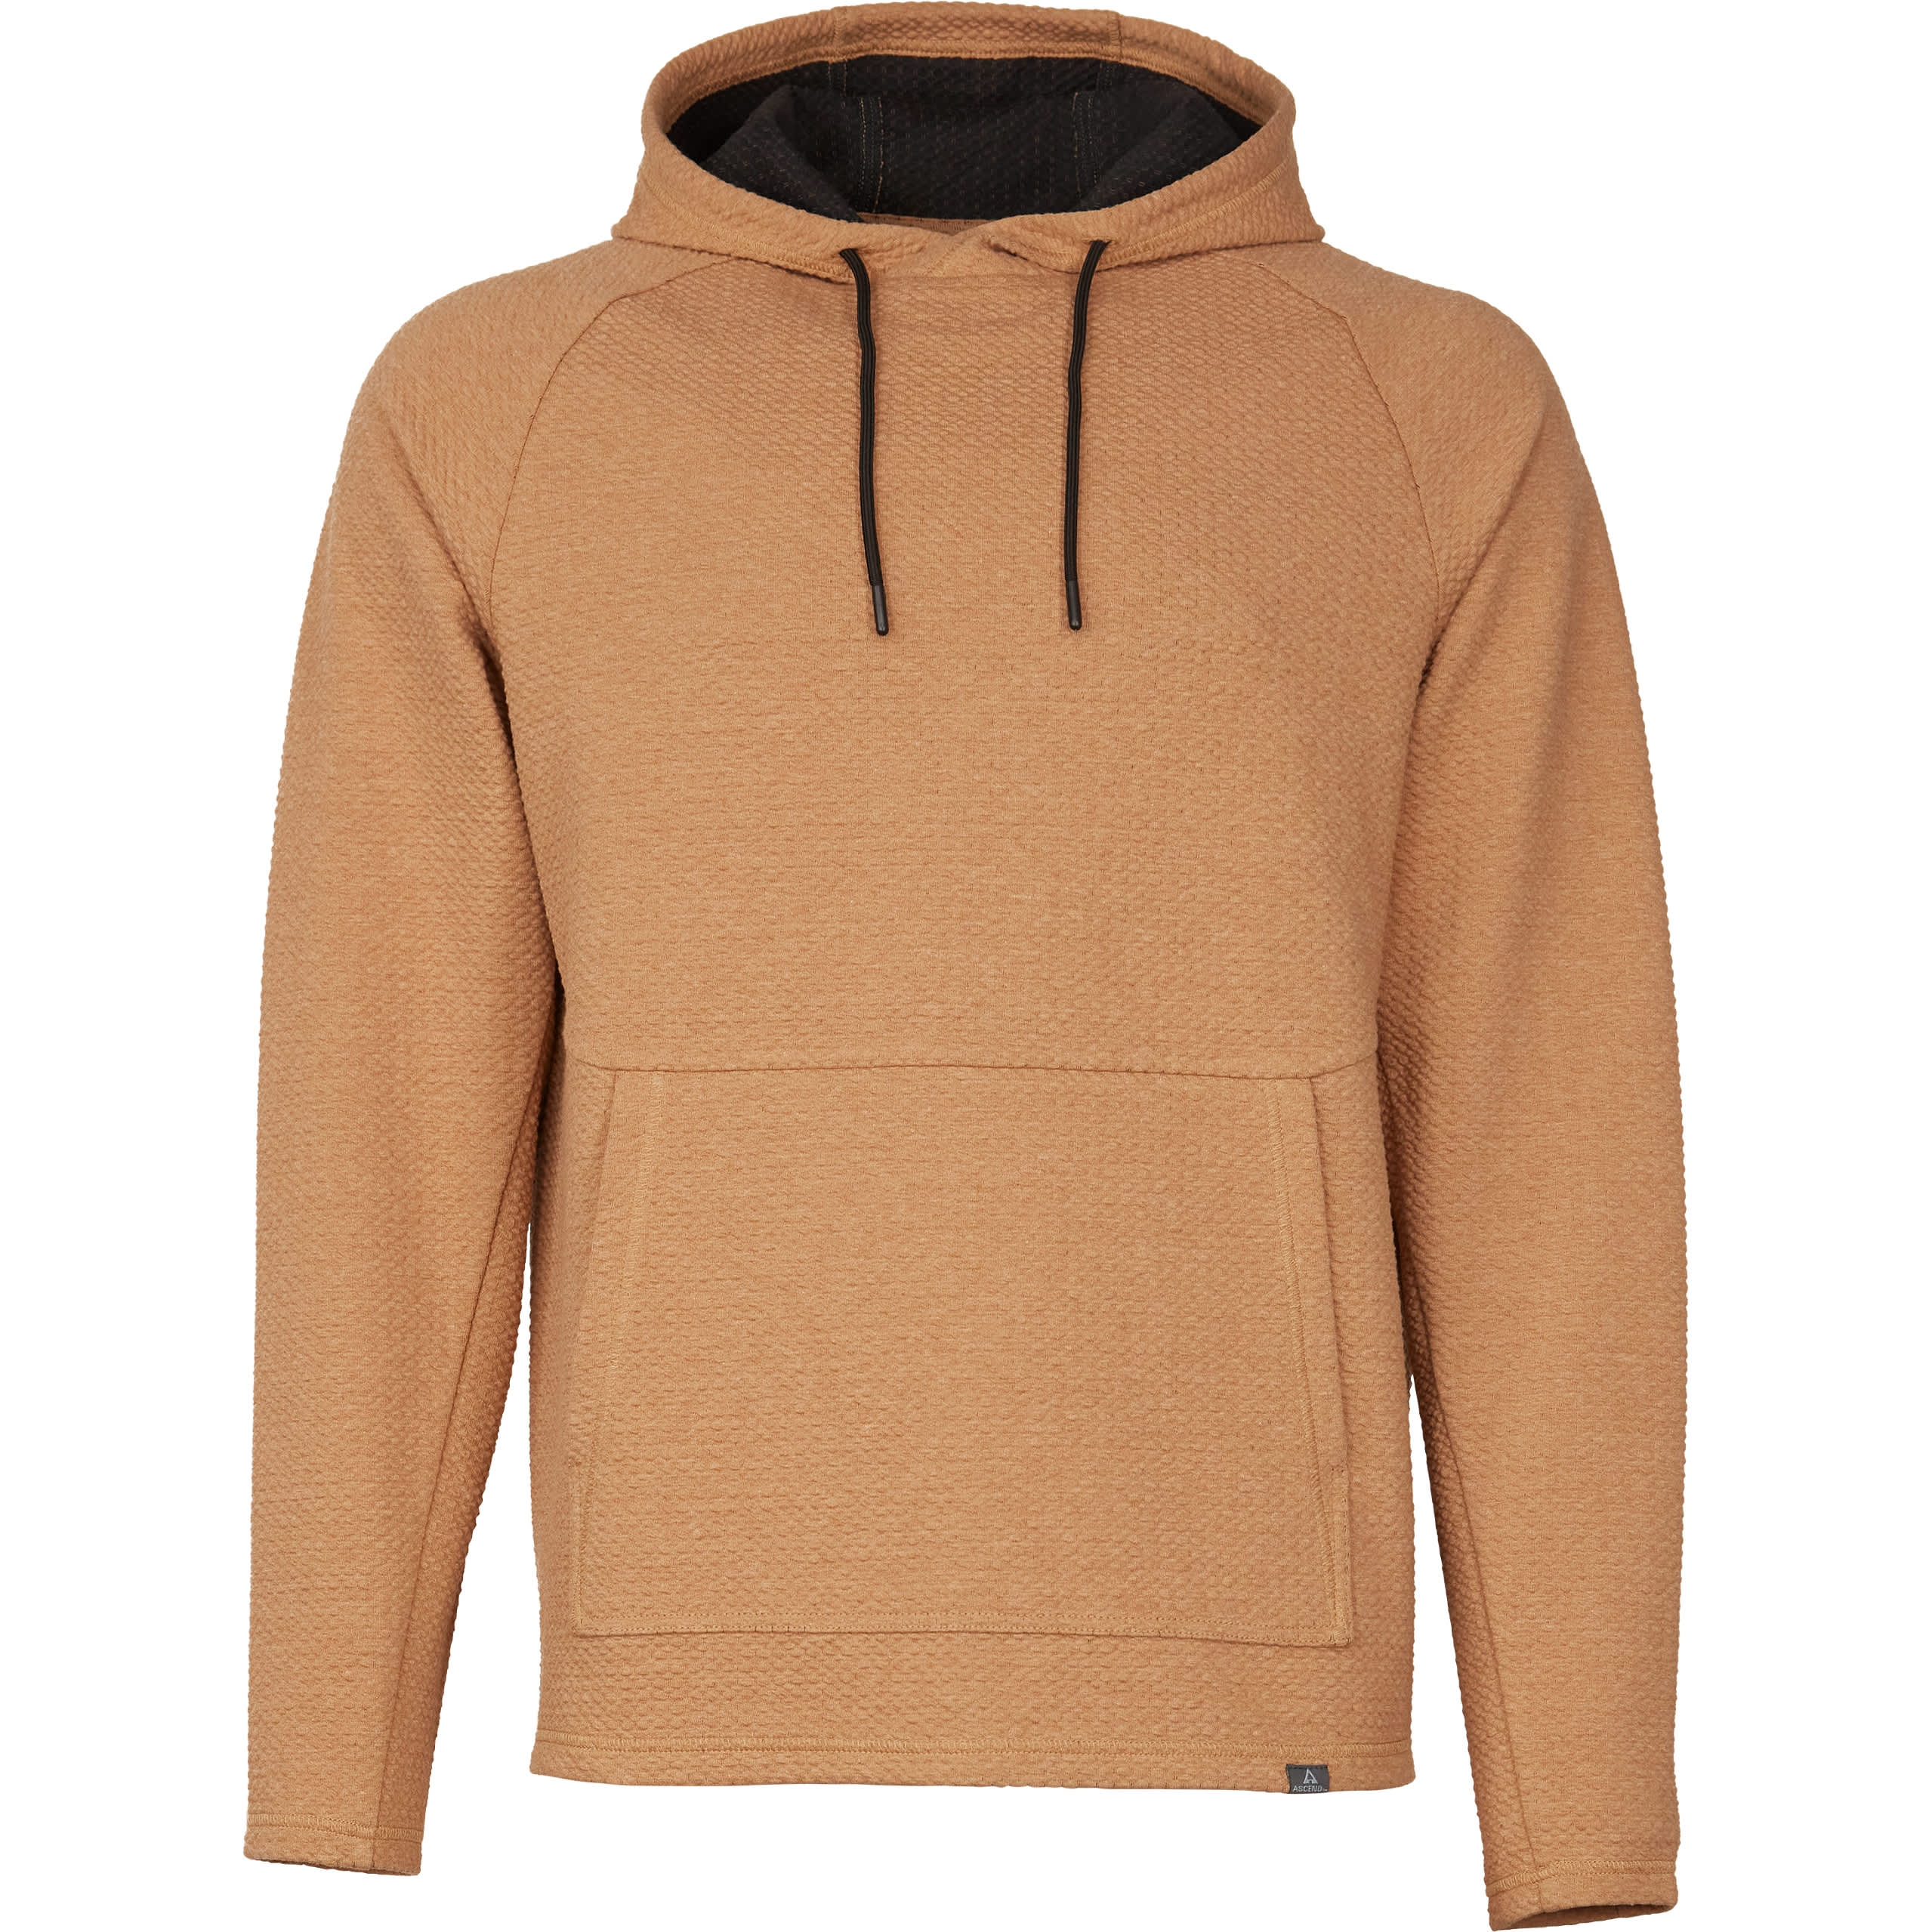 Men's Heavyweight Hooded Pullover Thick & Insulated